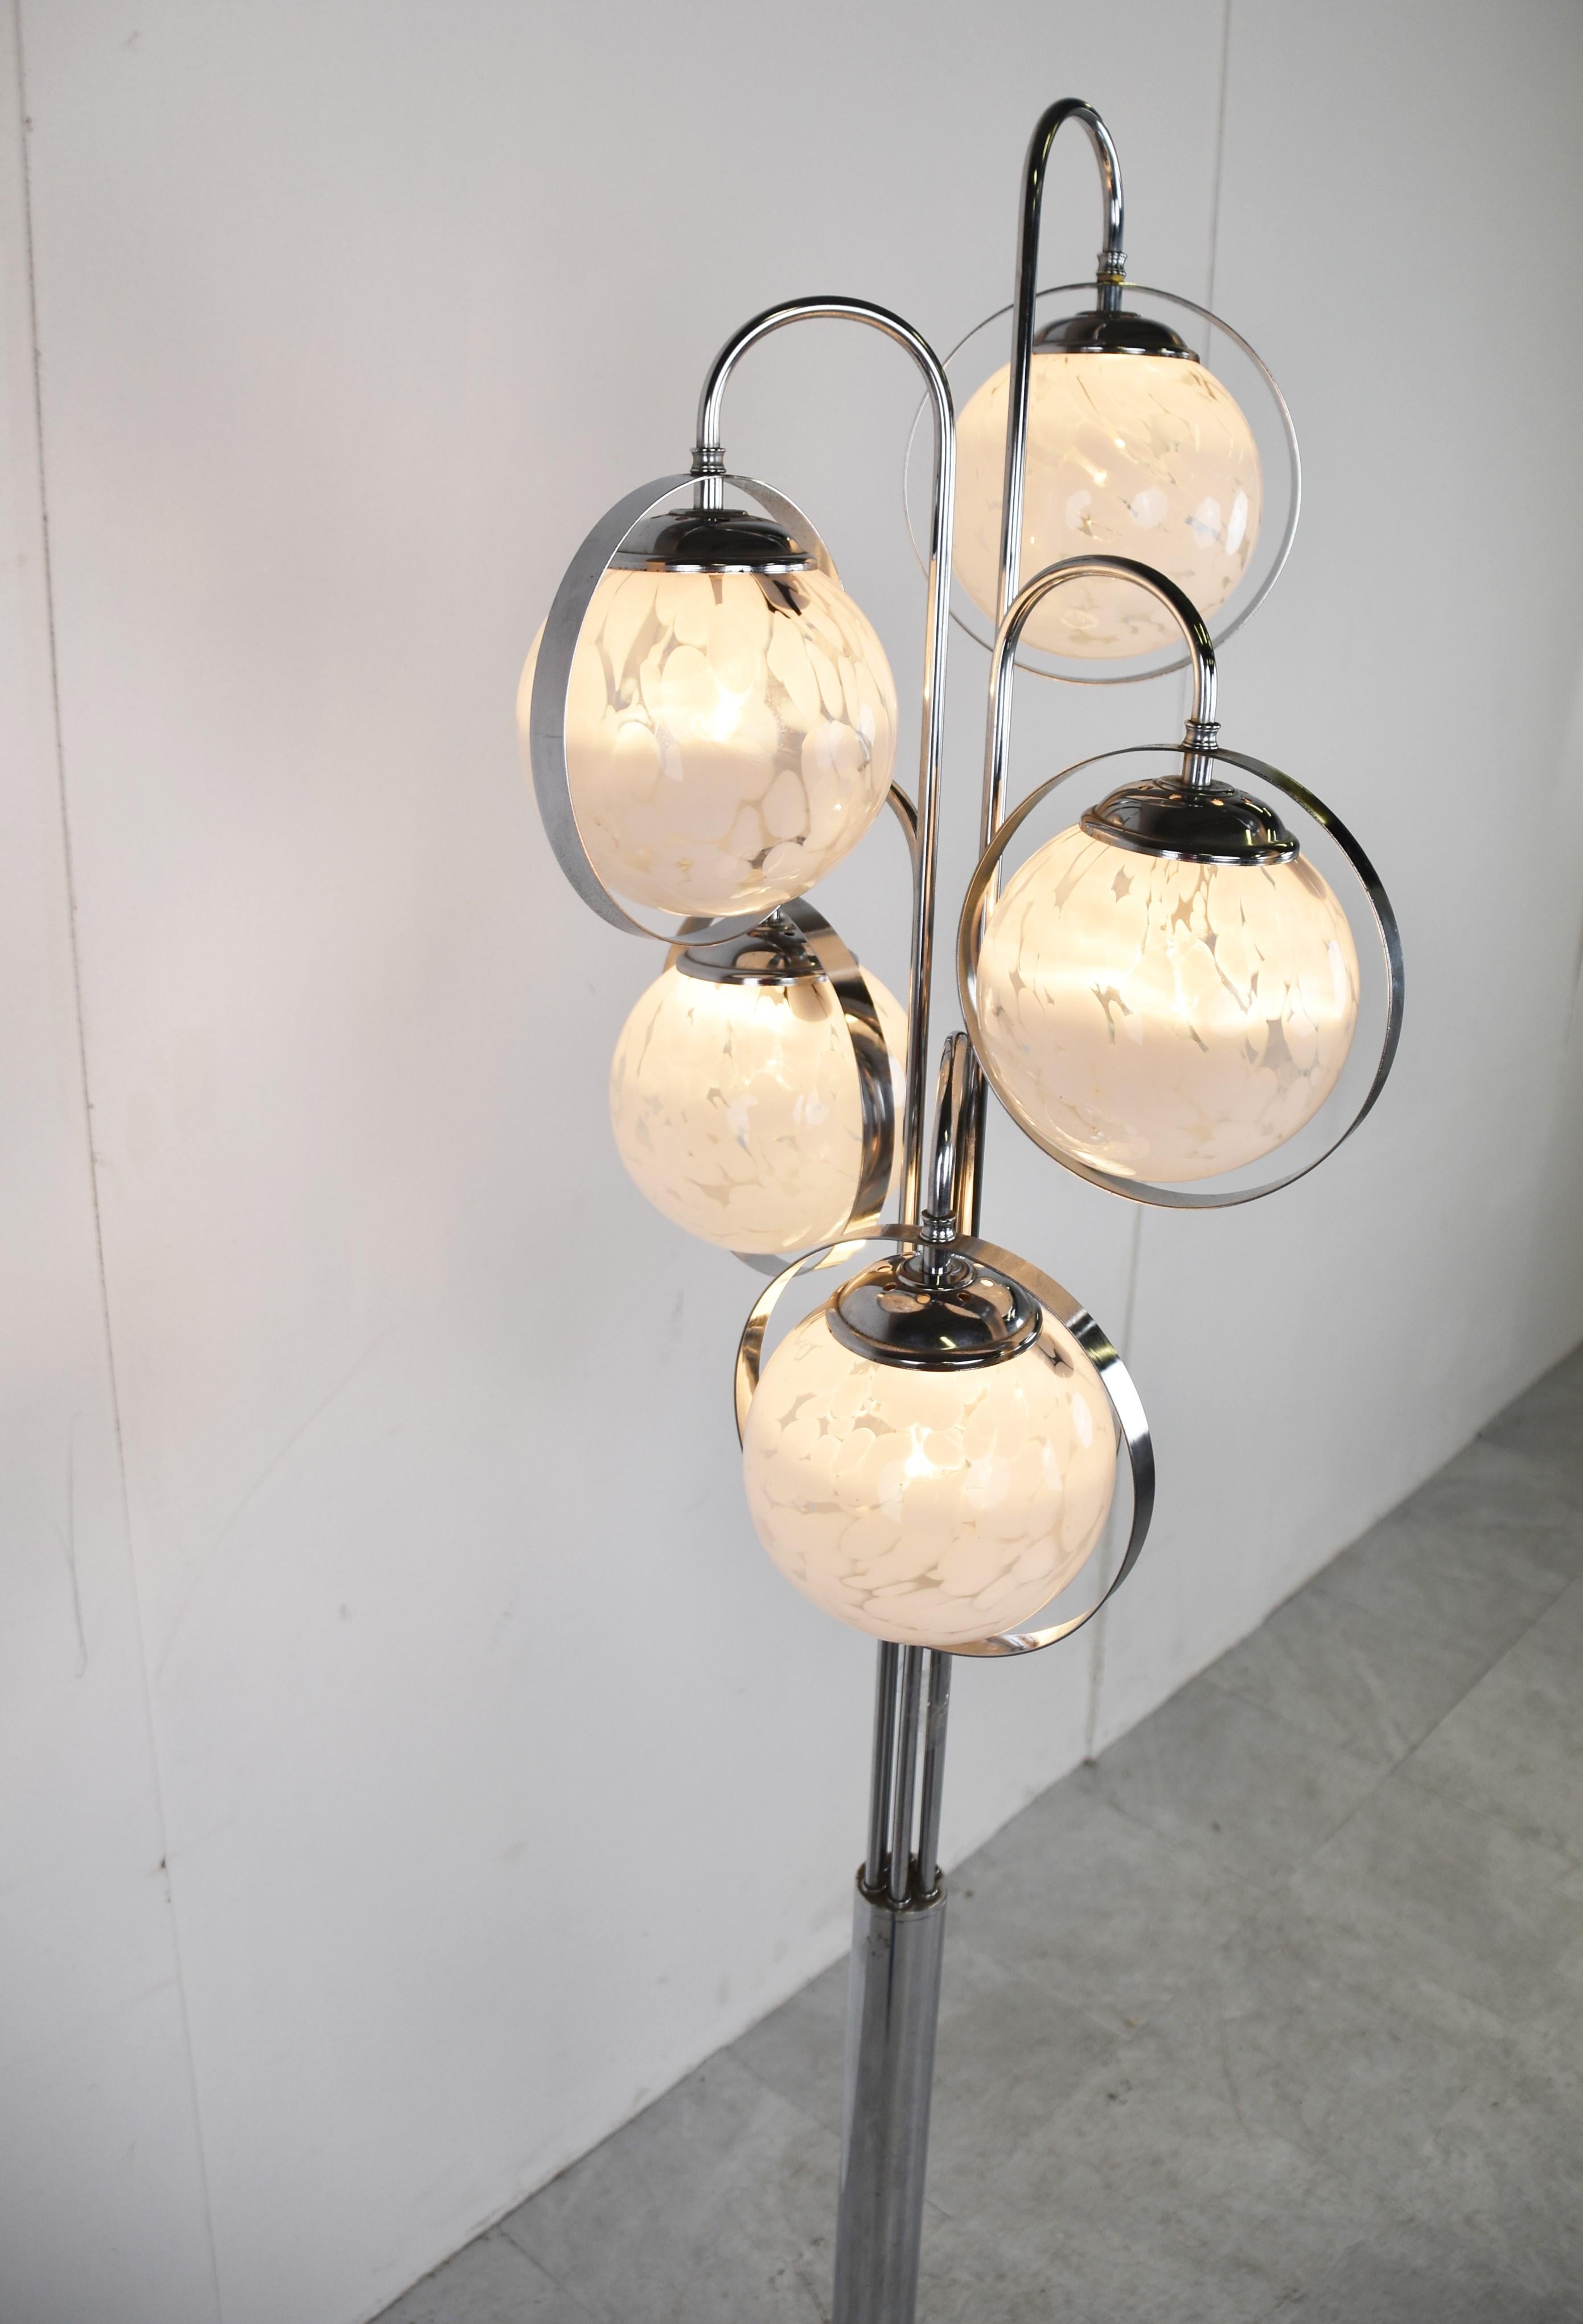 Vintage chrome floor lamp with 5 murano glass globes.

The lamp emits a nice soft light thanks to the stained glass globes .

Striking design with a timeless appeal. 

White marble base.

1970s - Italy

Dimensions:
Height: